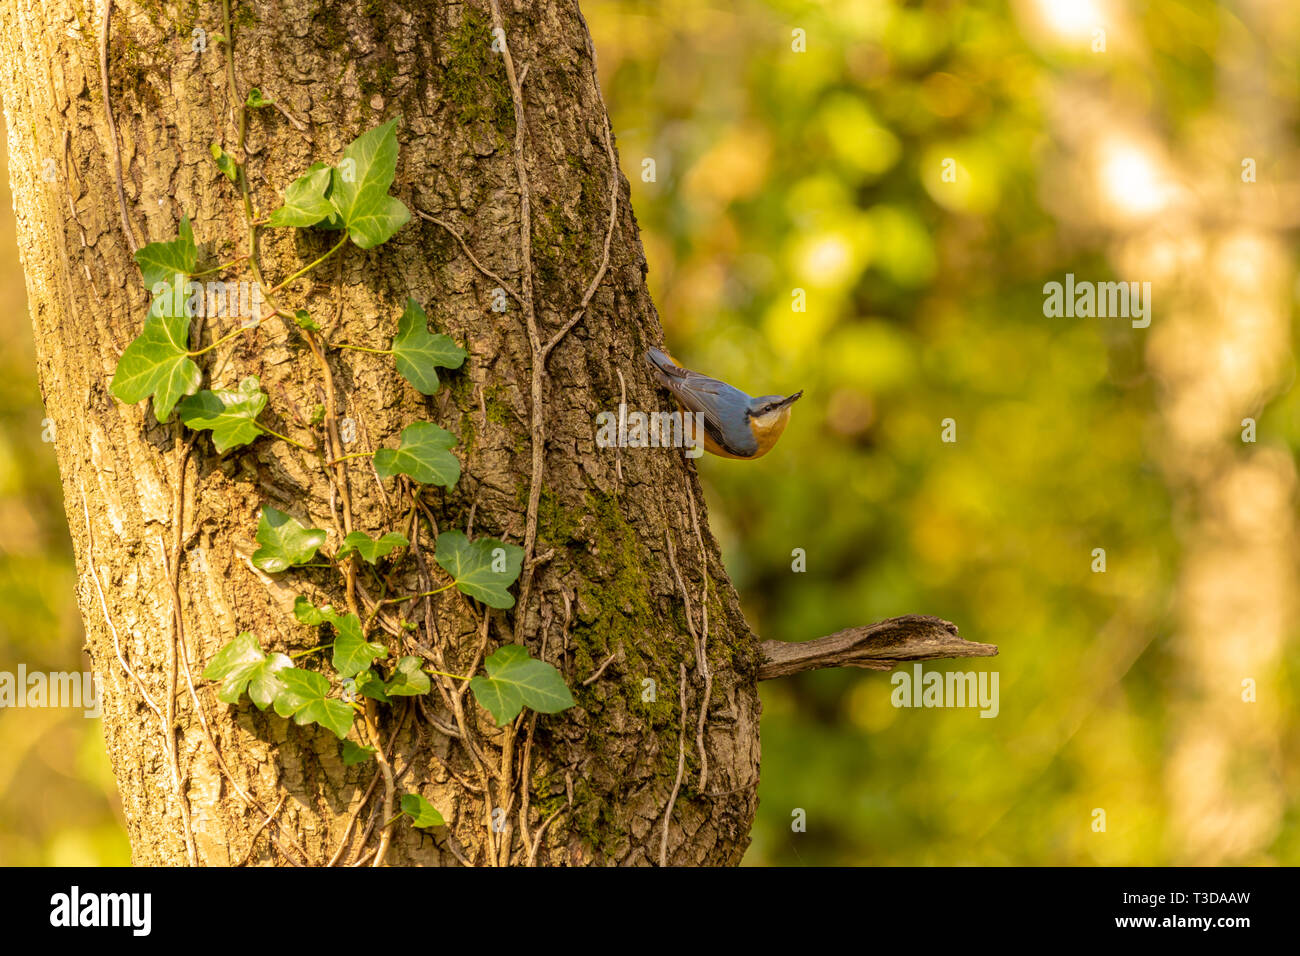 Colour wildlife portrait of adult Nuthatch perched on-side of tree poised to fly with insect in beak. Taken in Poole, Dorset, England. Stock Photo